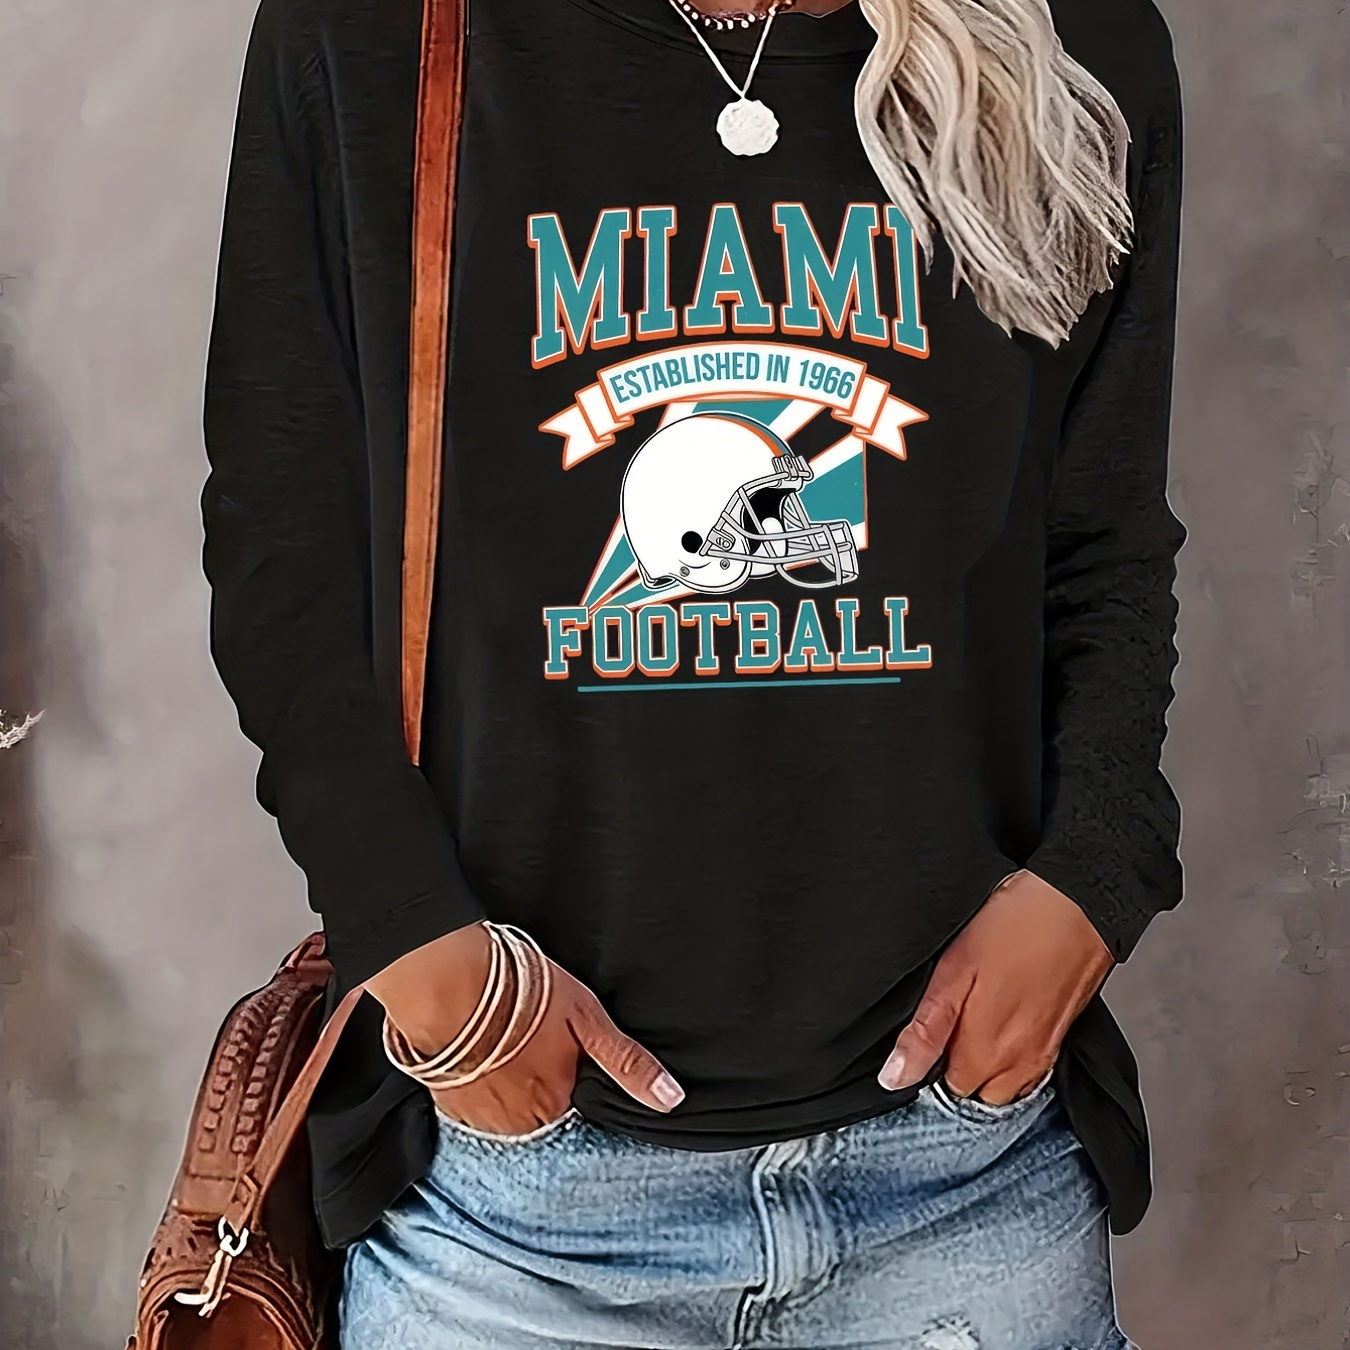 

Football Graphic Print T-shirt, Long Sleeve Crew Neck Casual Top For Spring & Fall, Women's Clothing